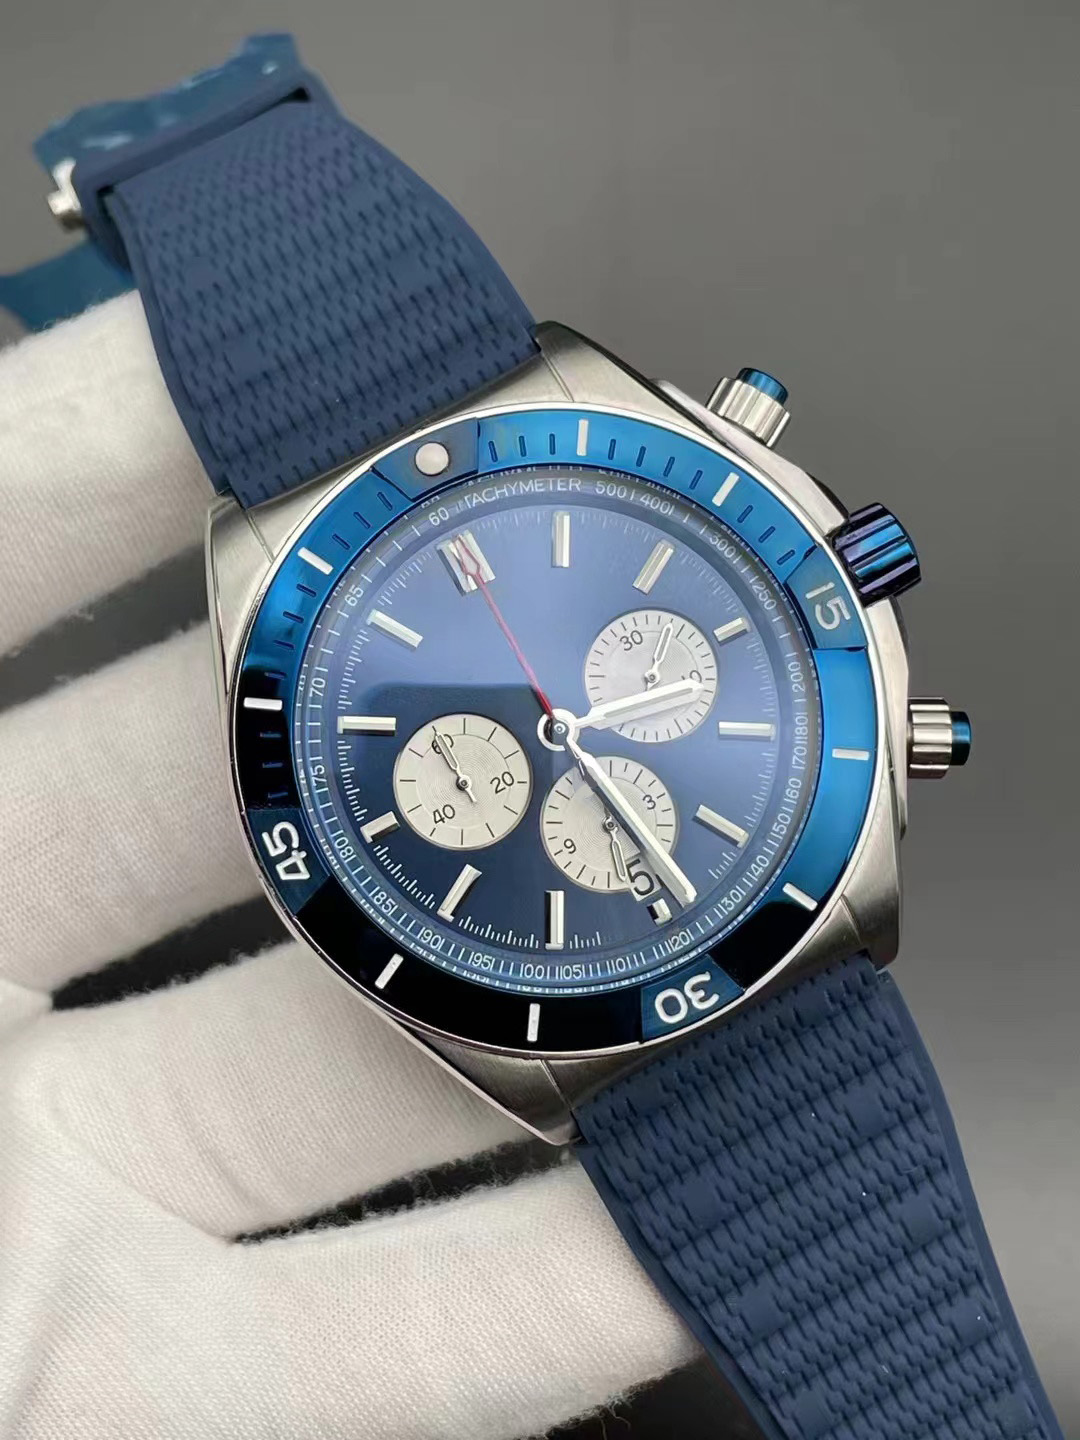 Fashionable ultra-thin men's quartz sports watch AAA+high-quality stainless steel case with blue bezel sports chronograph multifunctional movement sapphire glass